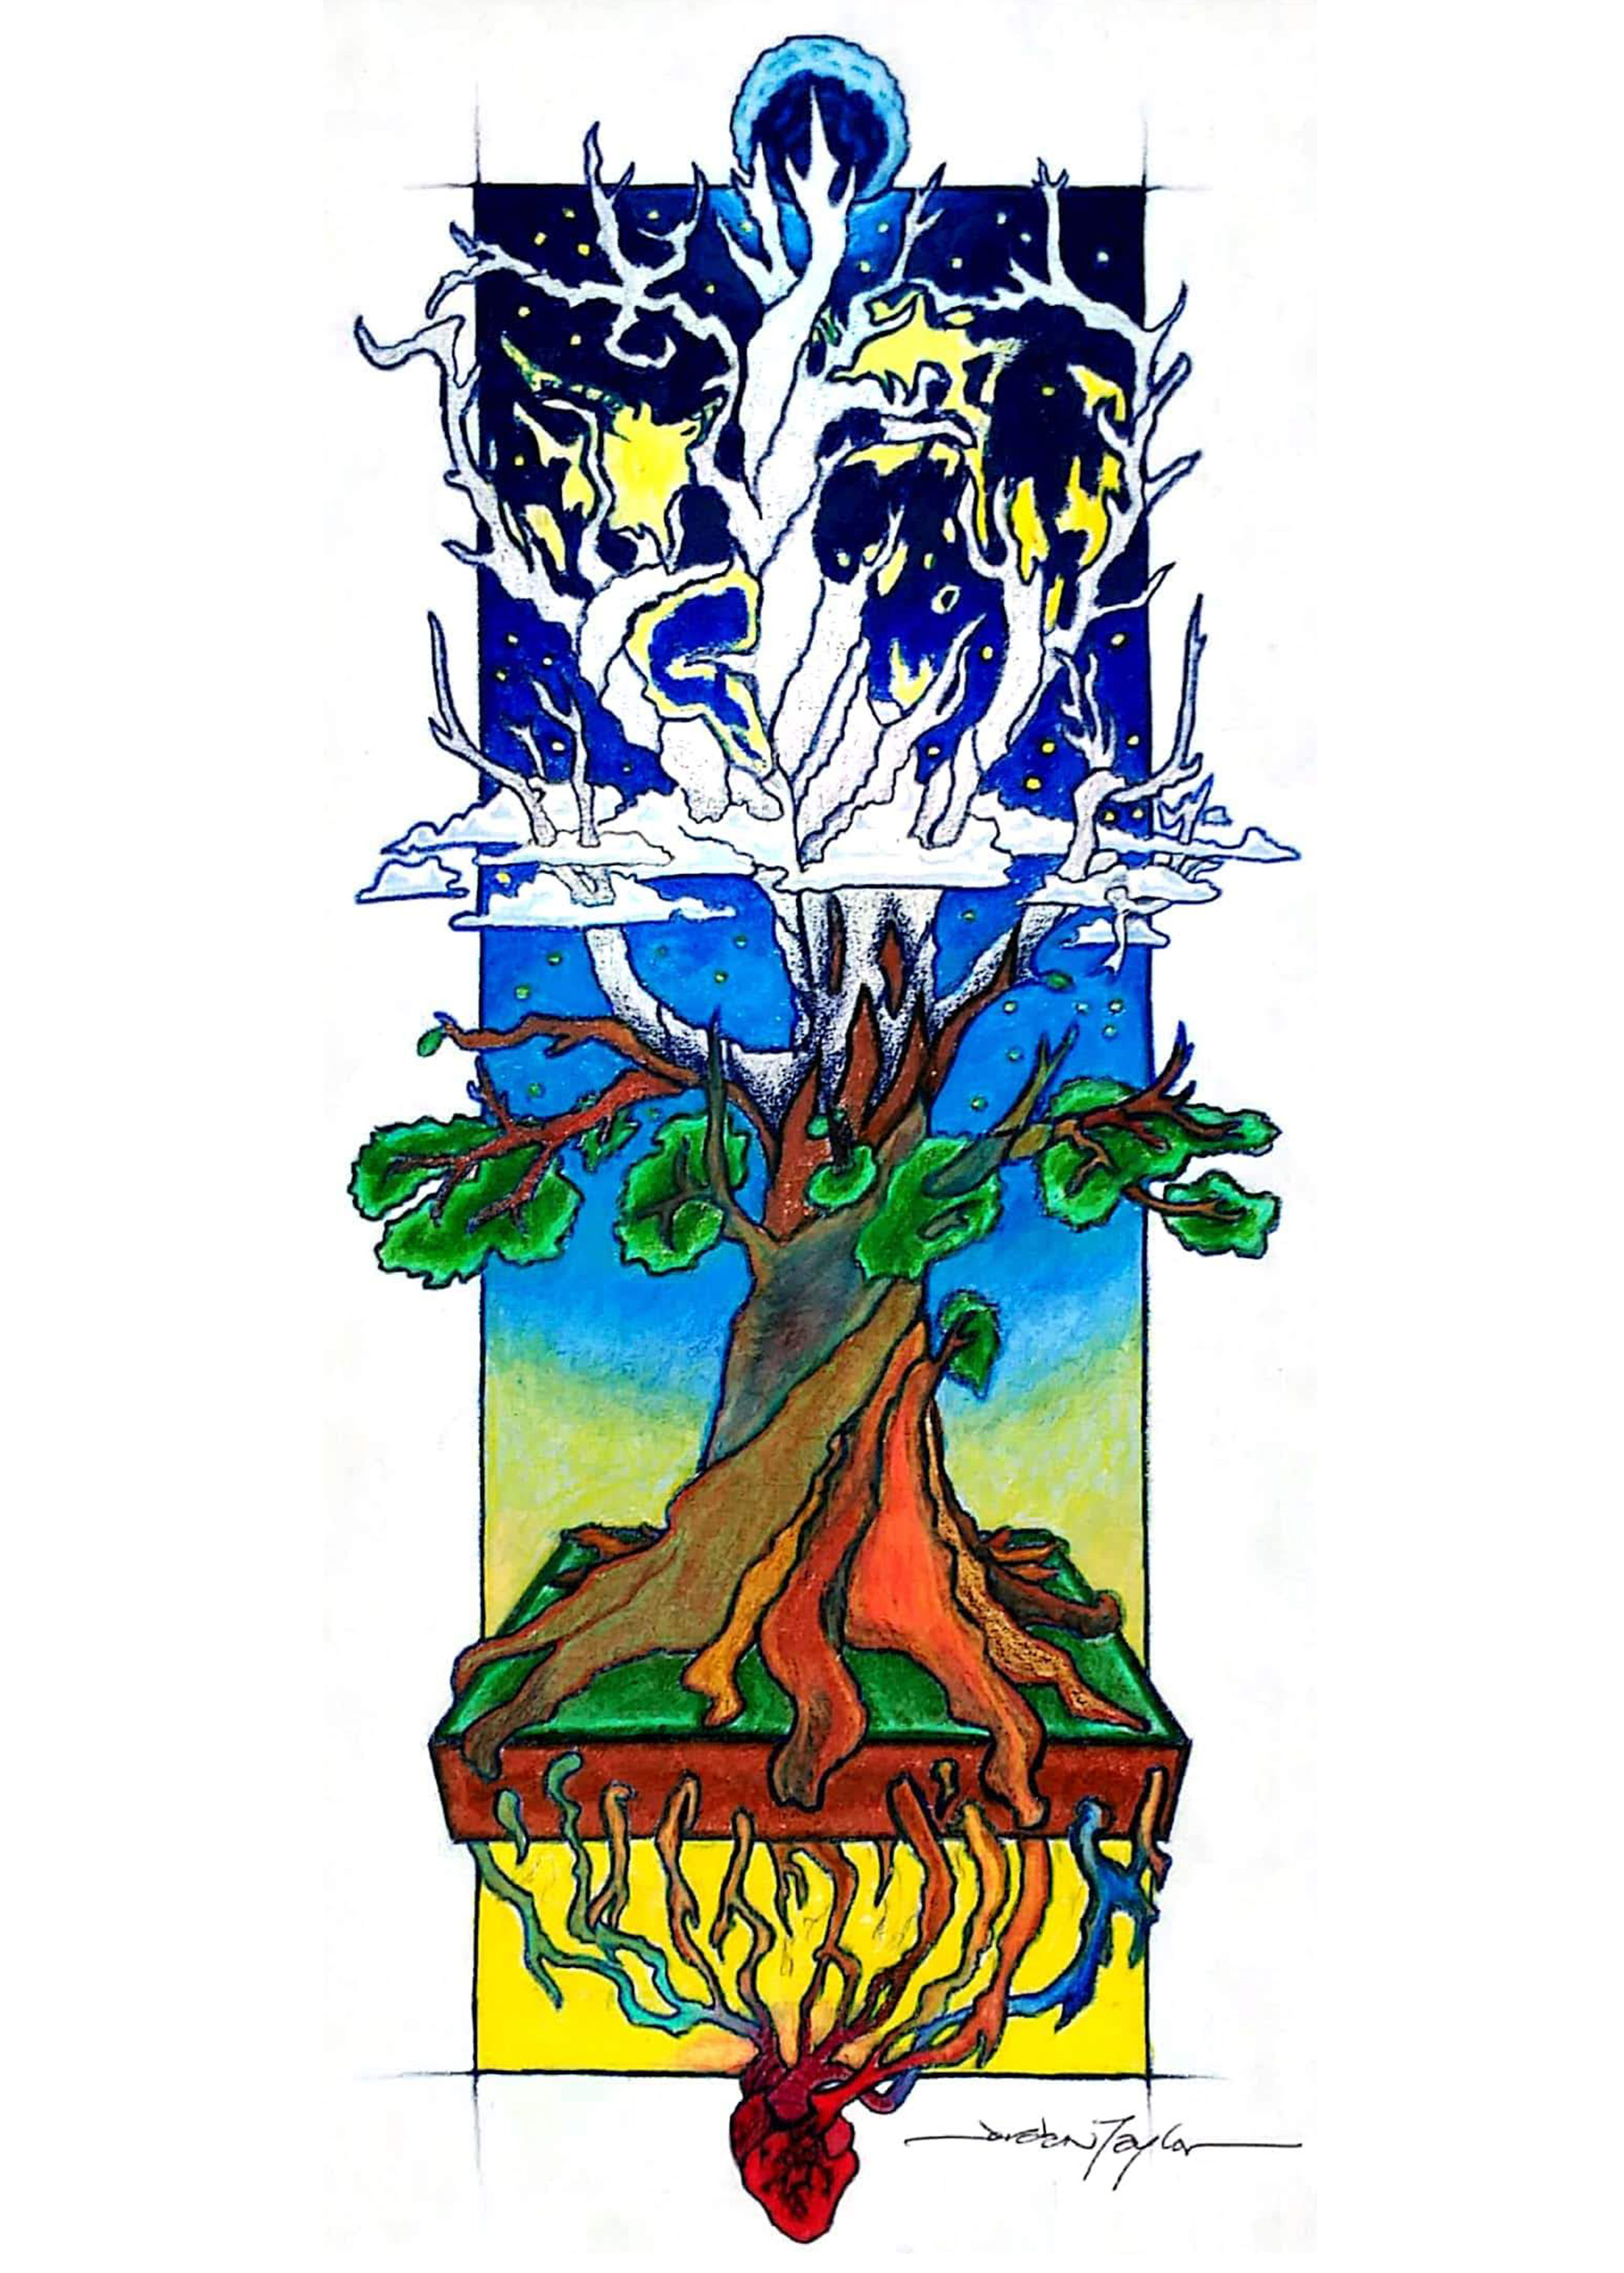 A tree growing from a heart with many colors up to barren branches against the night sky.